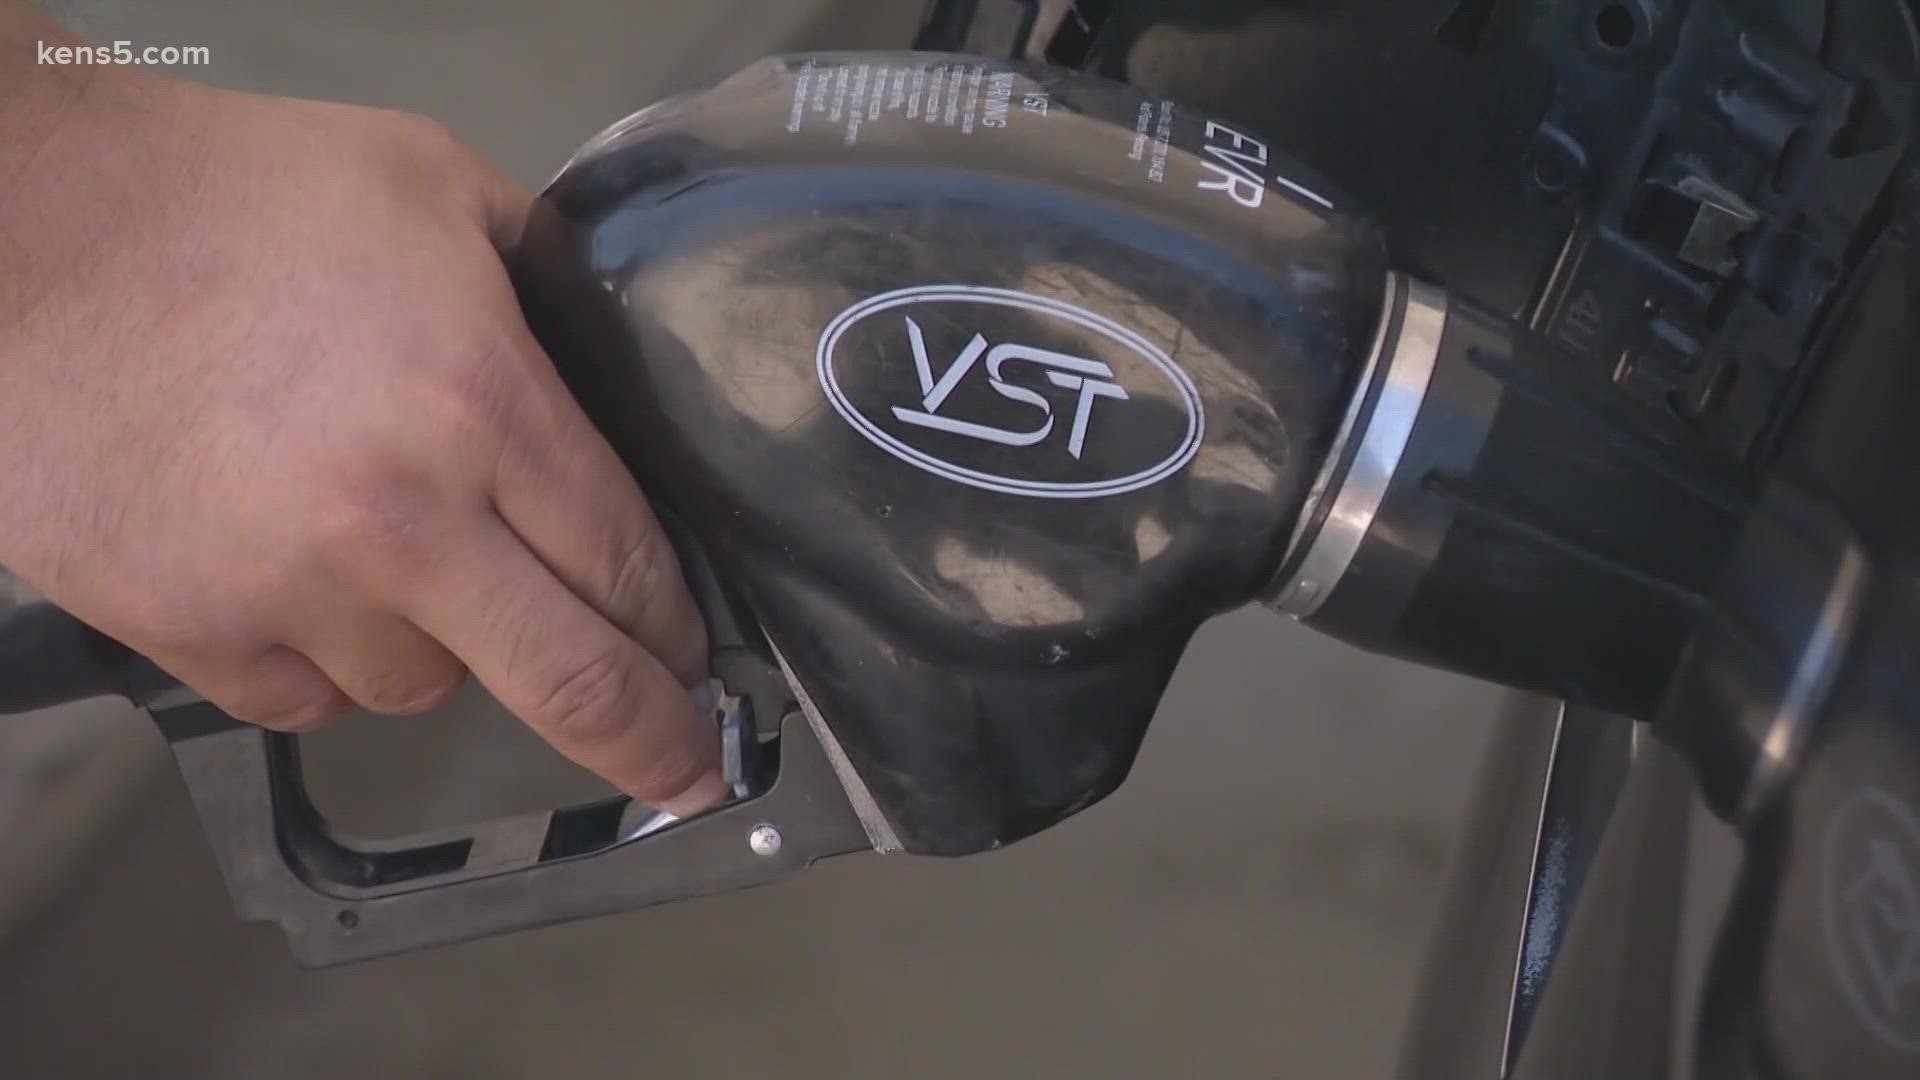 San Antonio drivers are paying $2.87 per gallon of unleaded gasoline, according to AAA Texas.